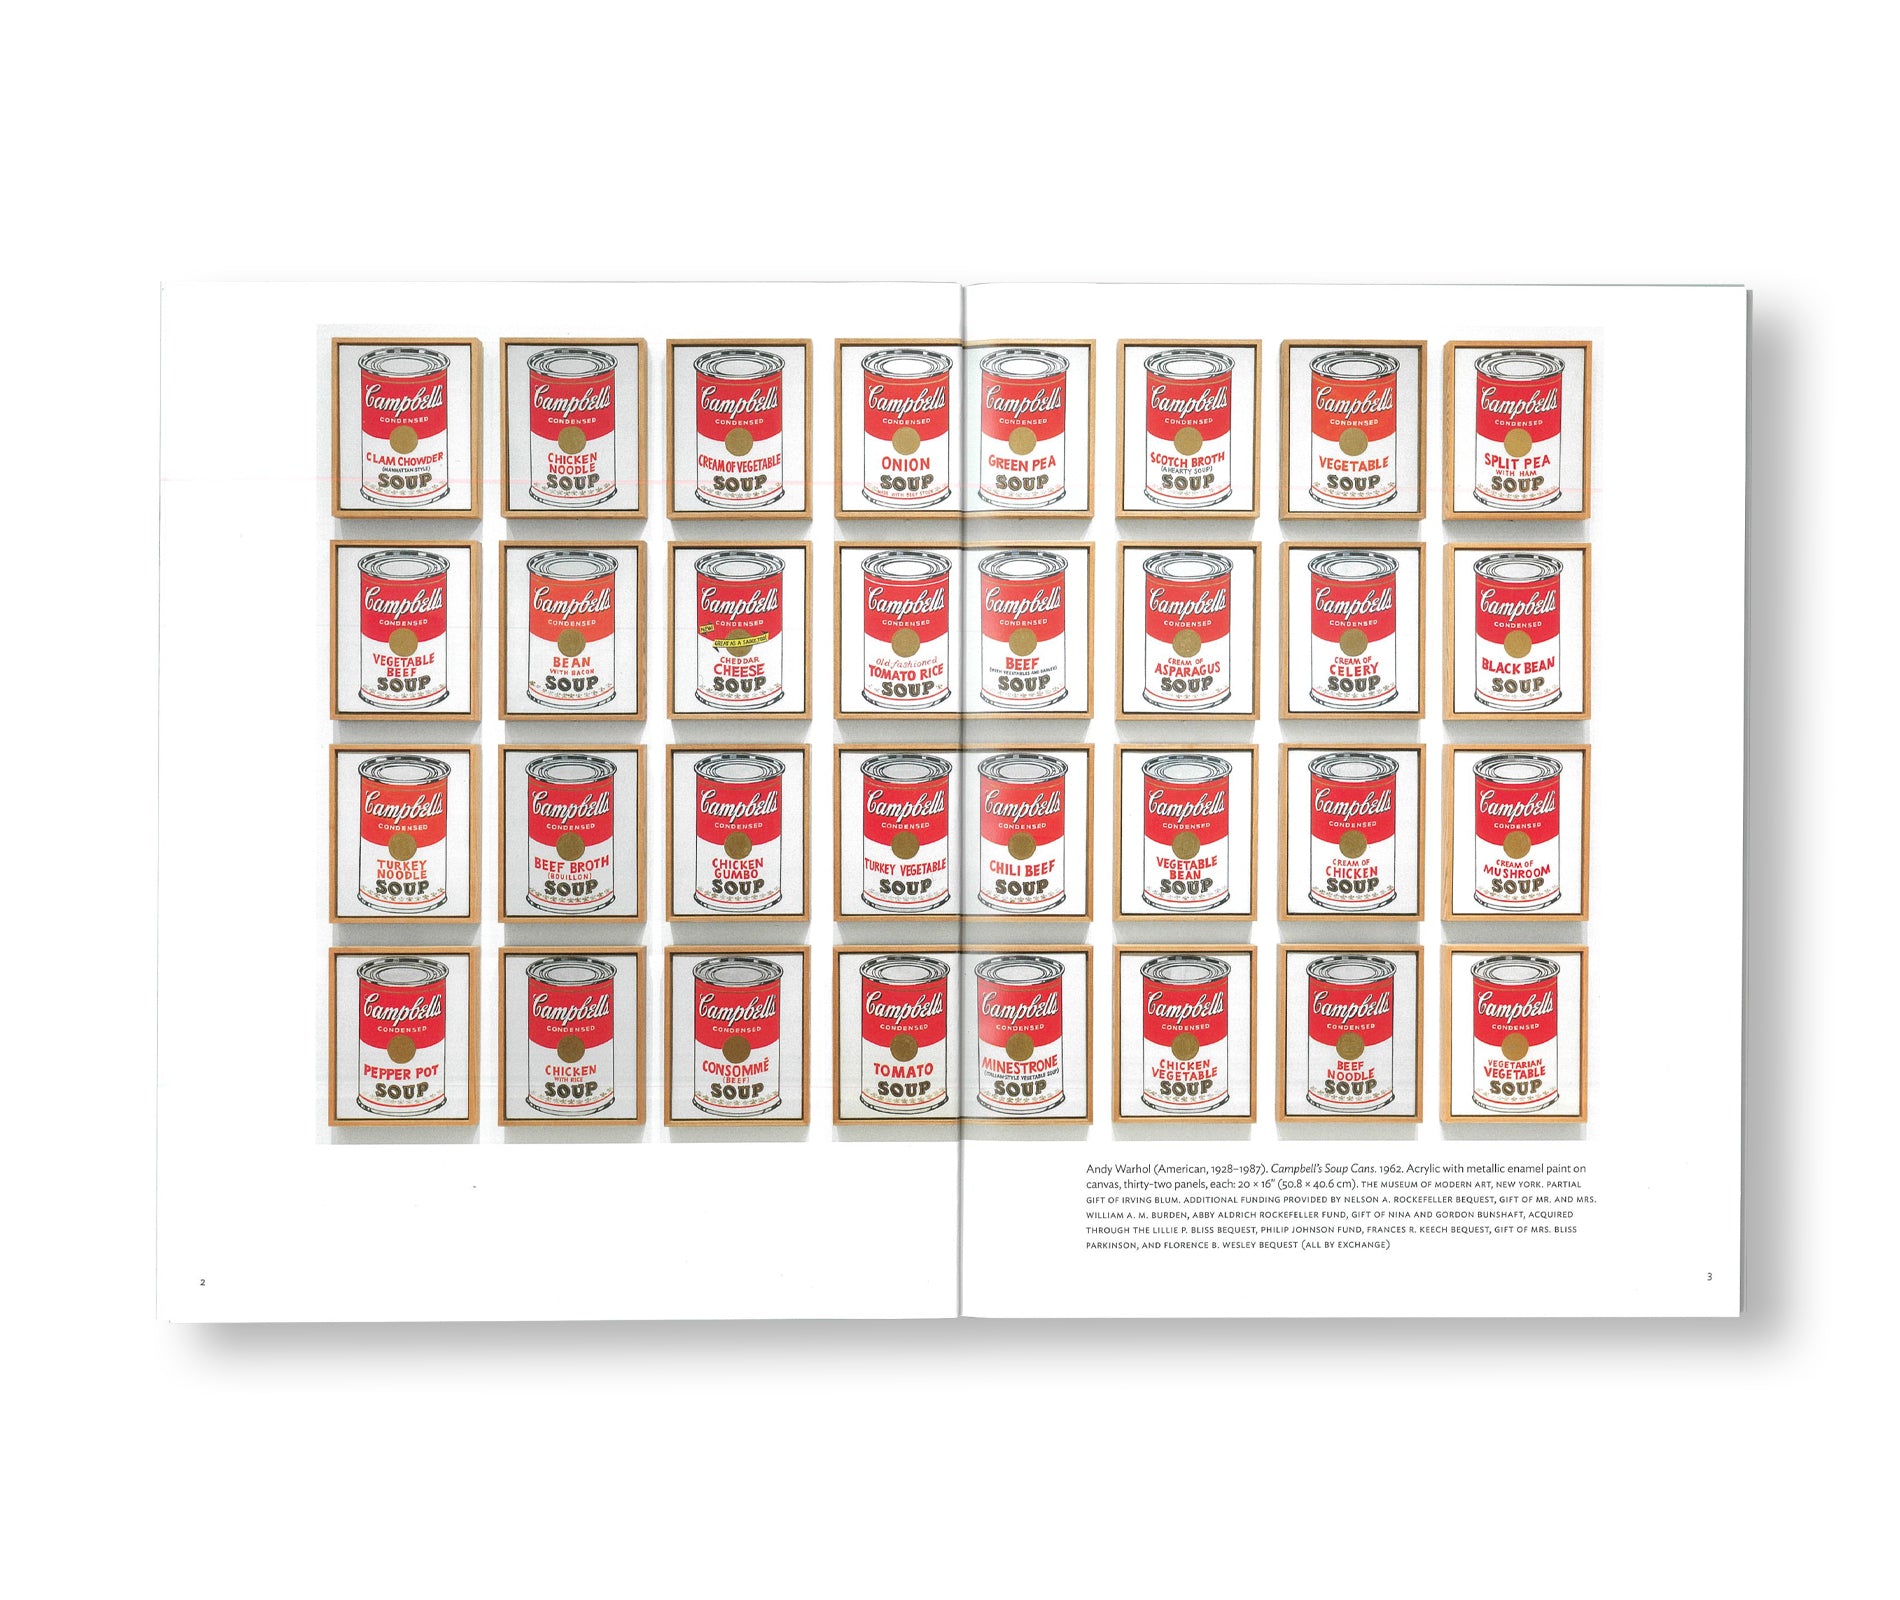 CAMPBELL’S SOUP CANS by Andy Warhol